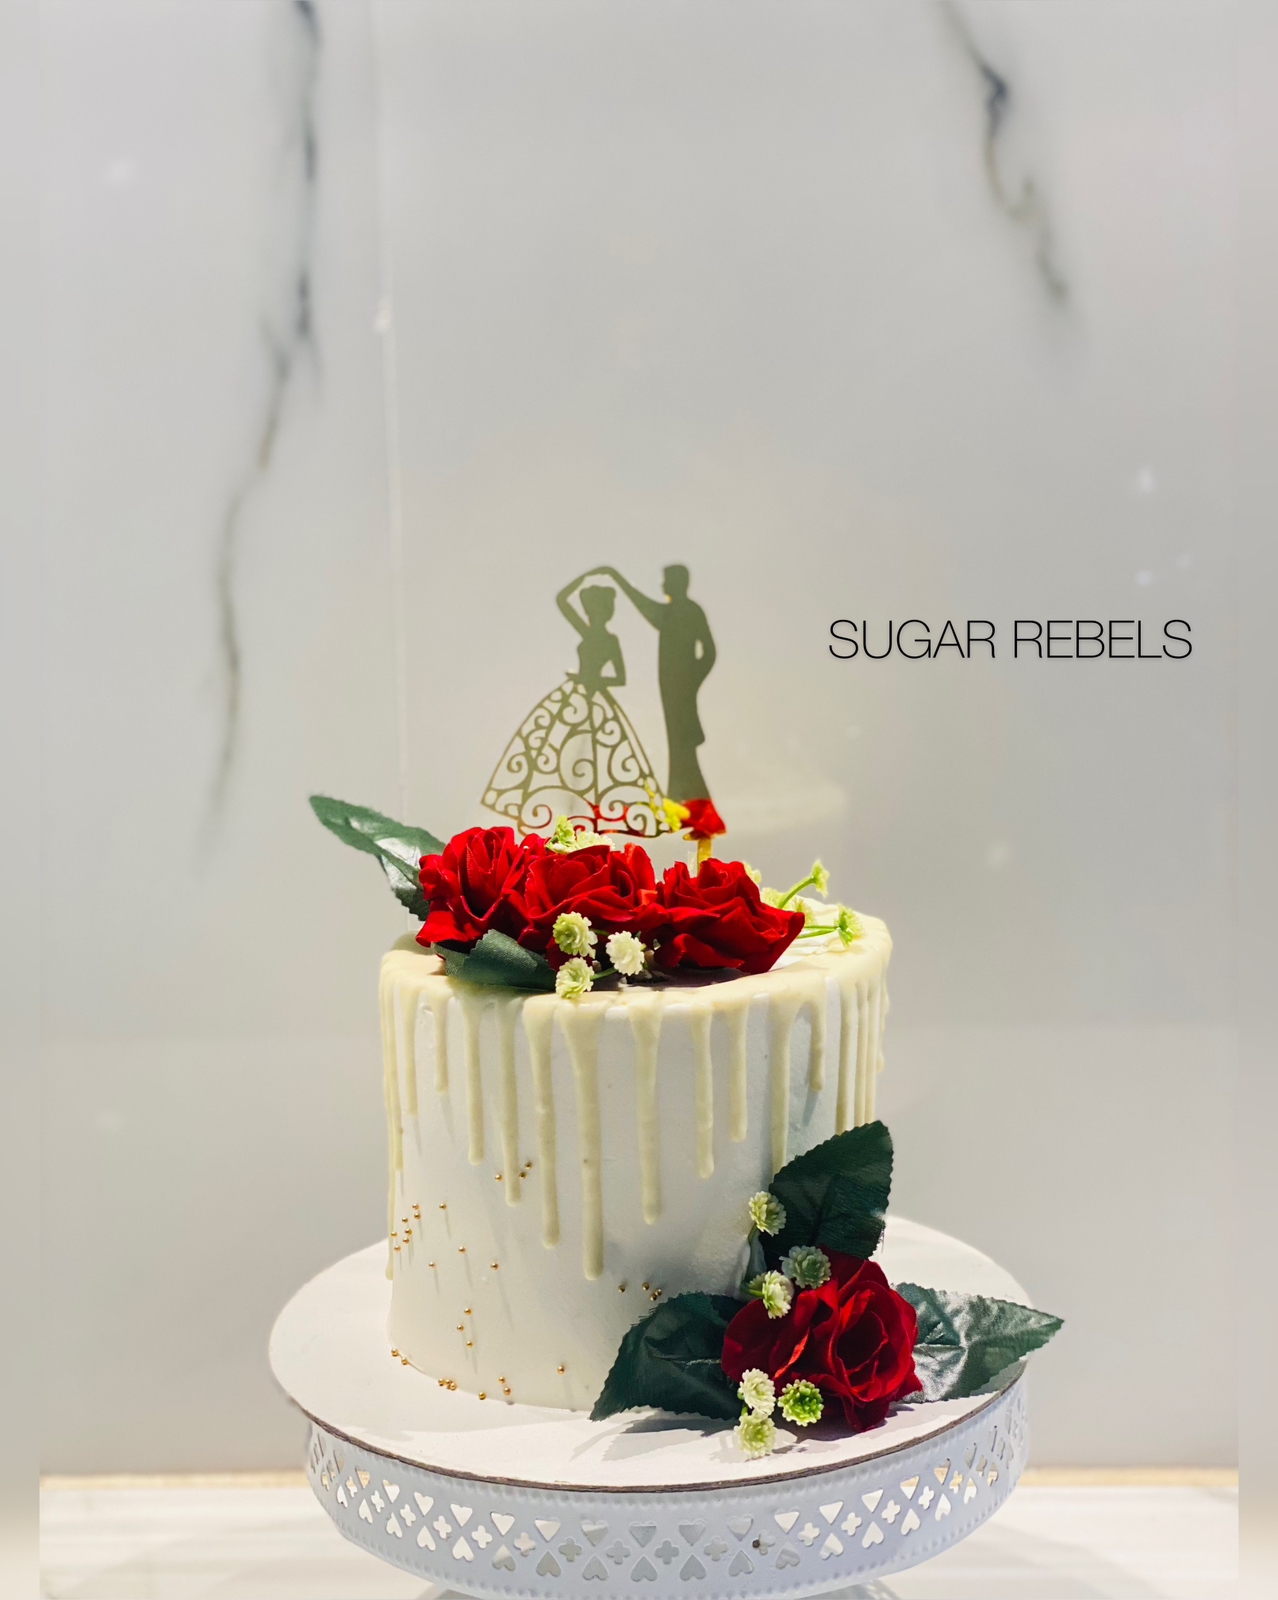 Cake Design and Flavour Inspirations for your Engagement